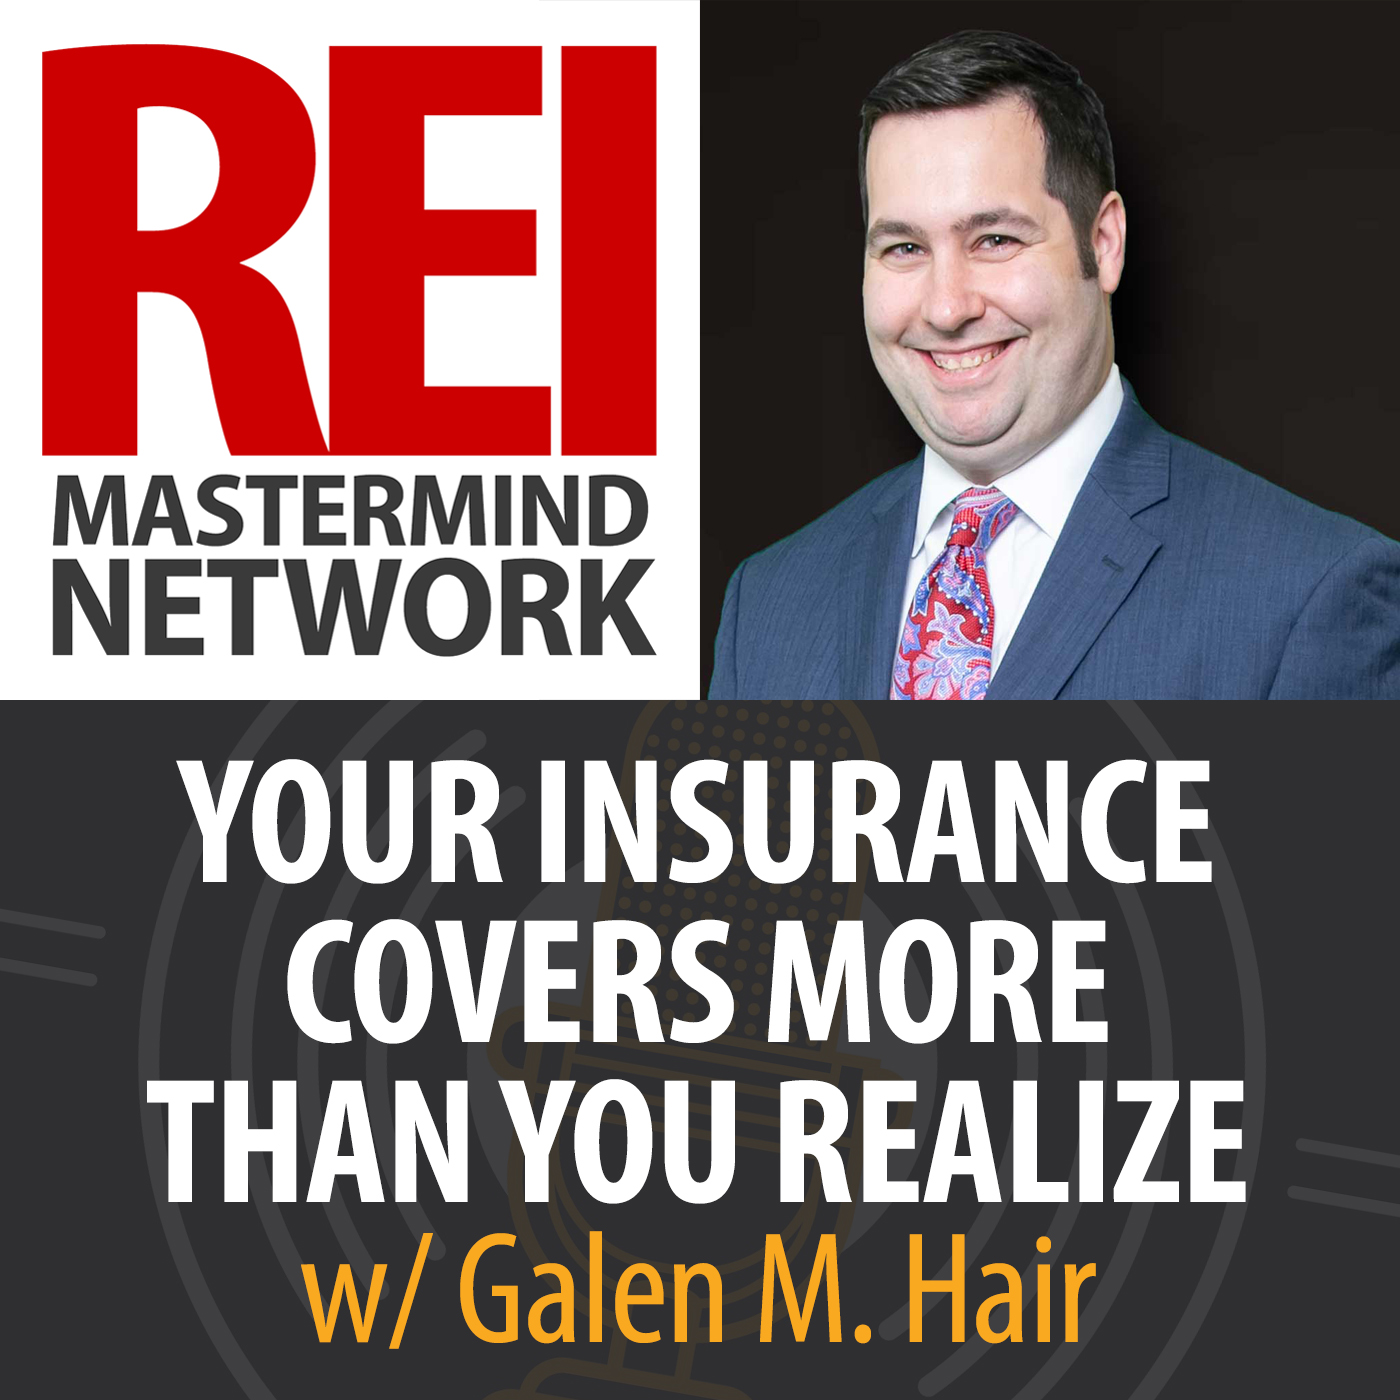 Your Insurance Covers More Than You Realize with Galen M. Hair Image